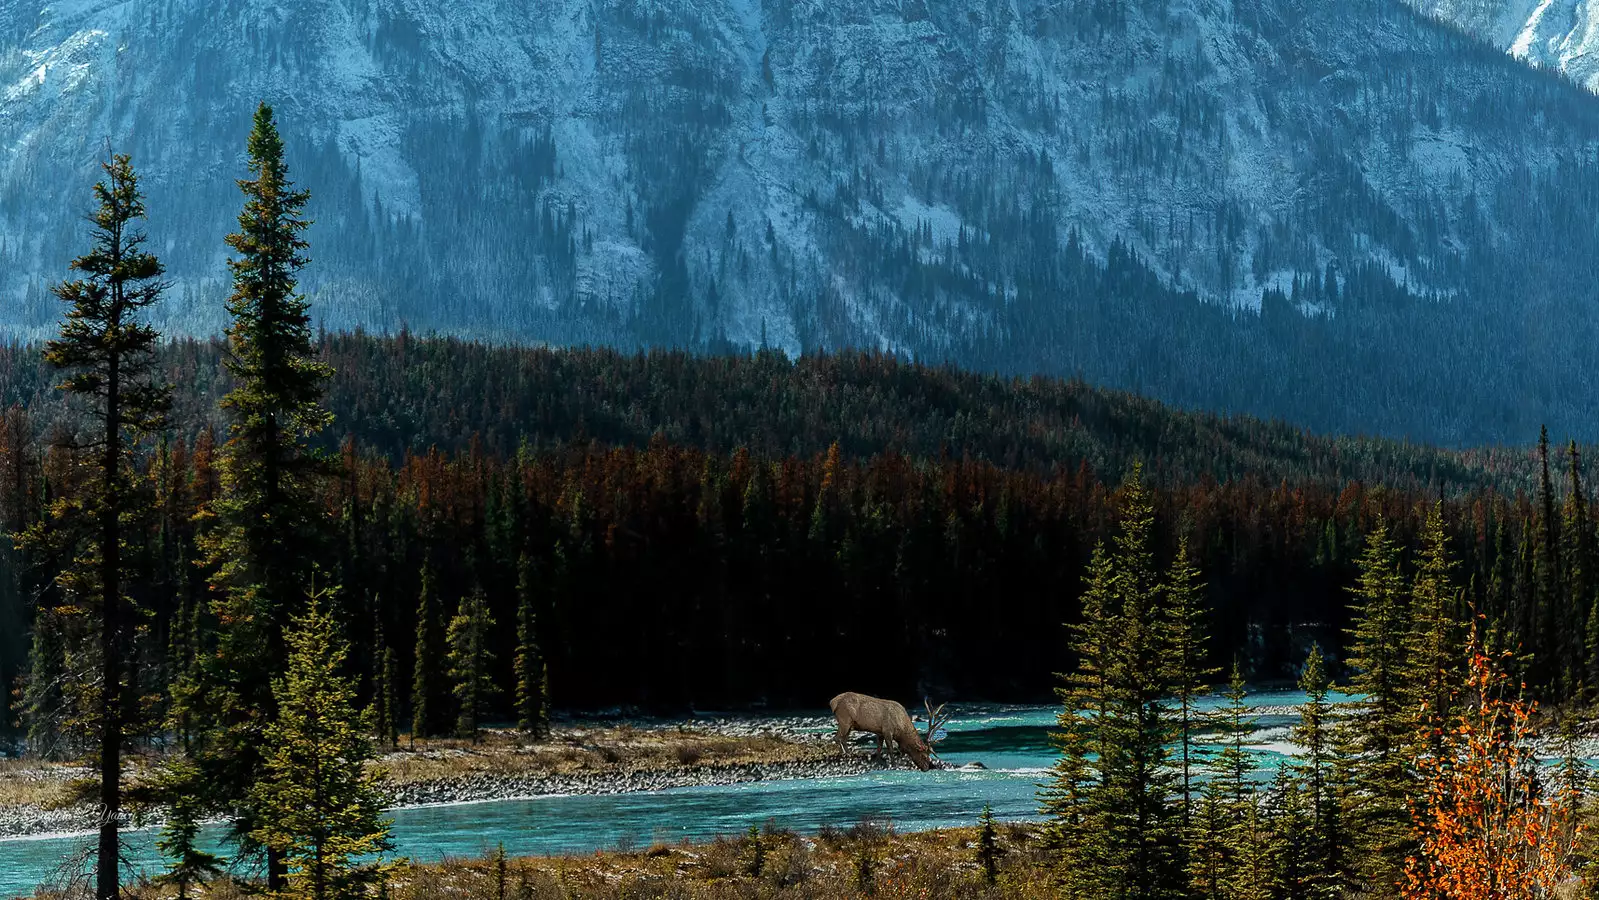 Athabasca river photo by G. Lamar on Flickr